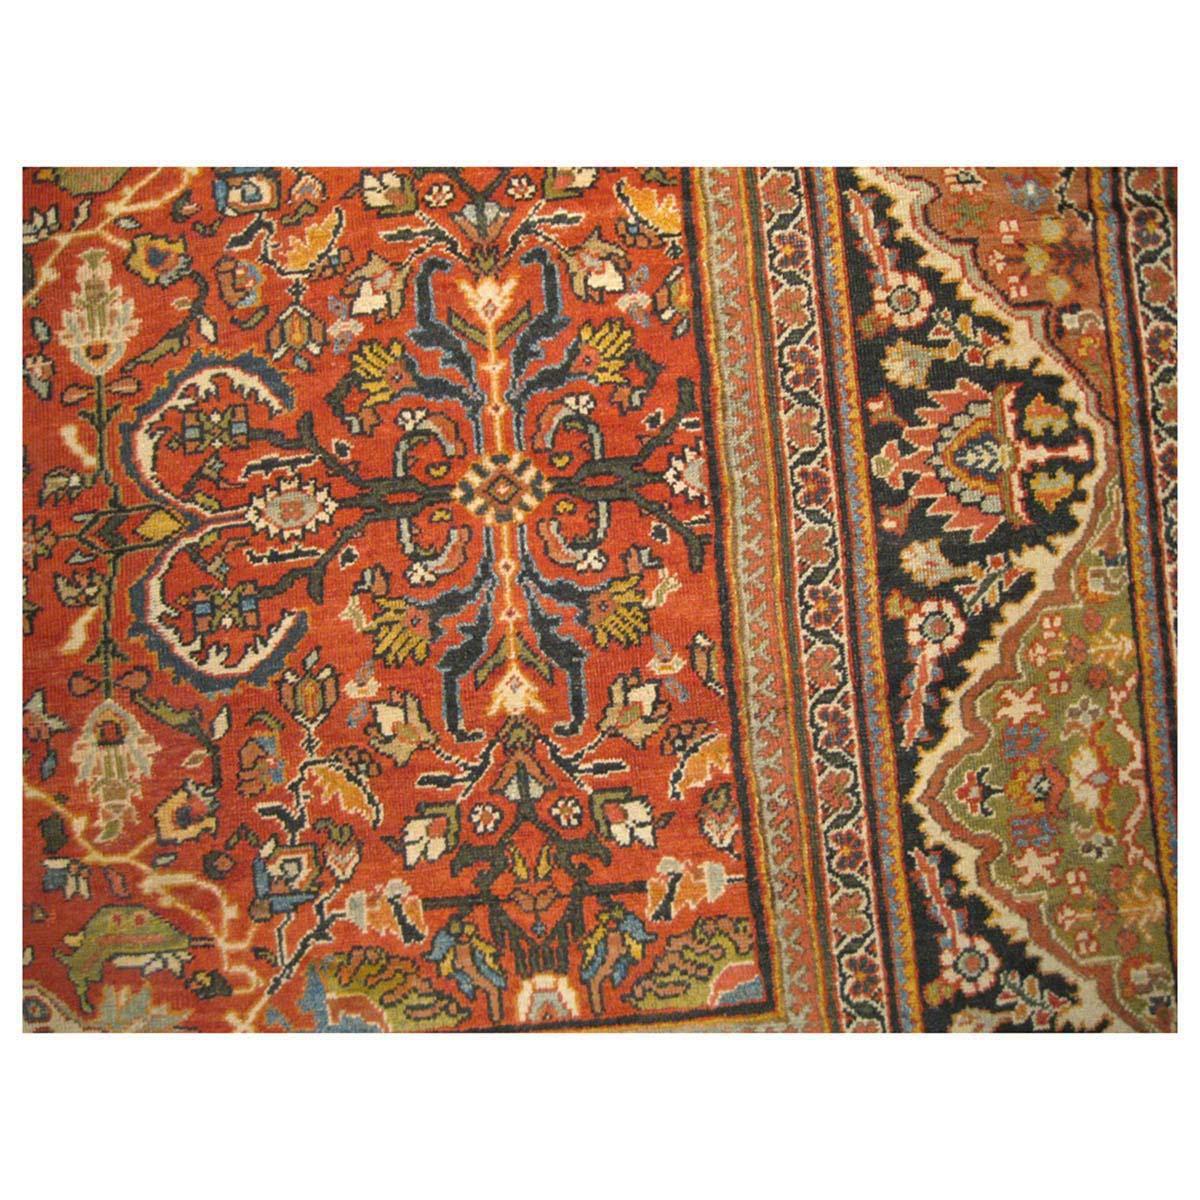 19th Century Antique Persian Sultanabad 10x12 Red Handmade Rug In Good Condition For Sale In Houston, TX